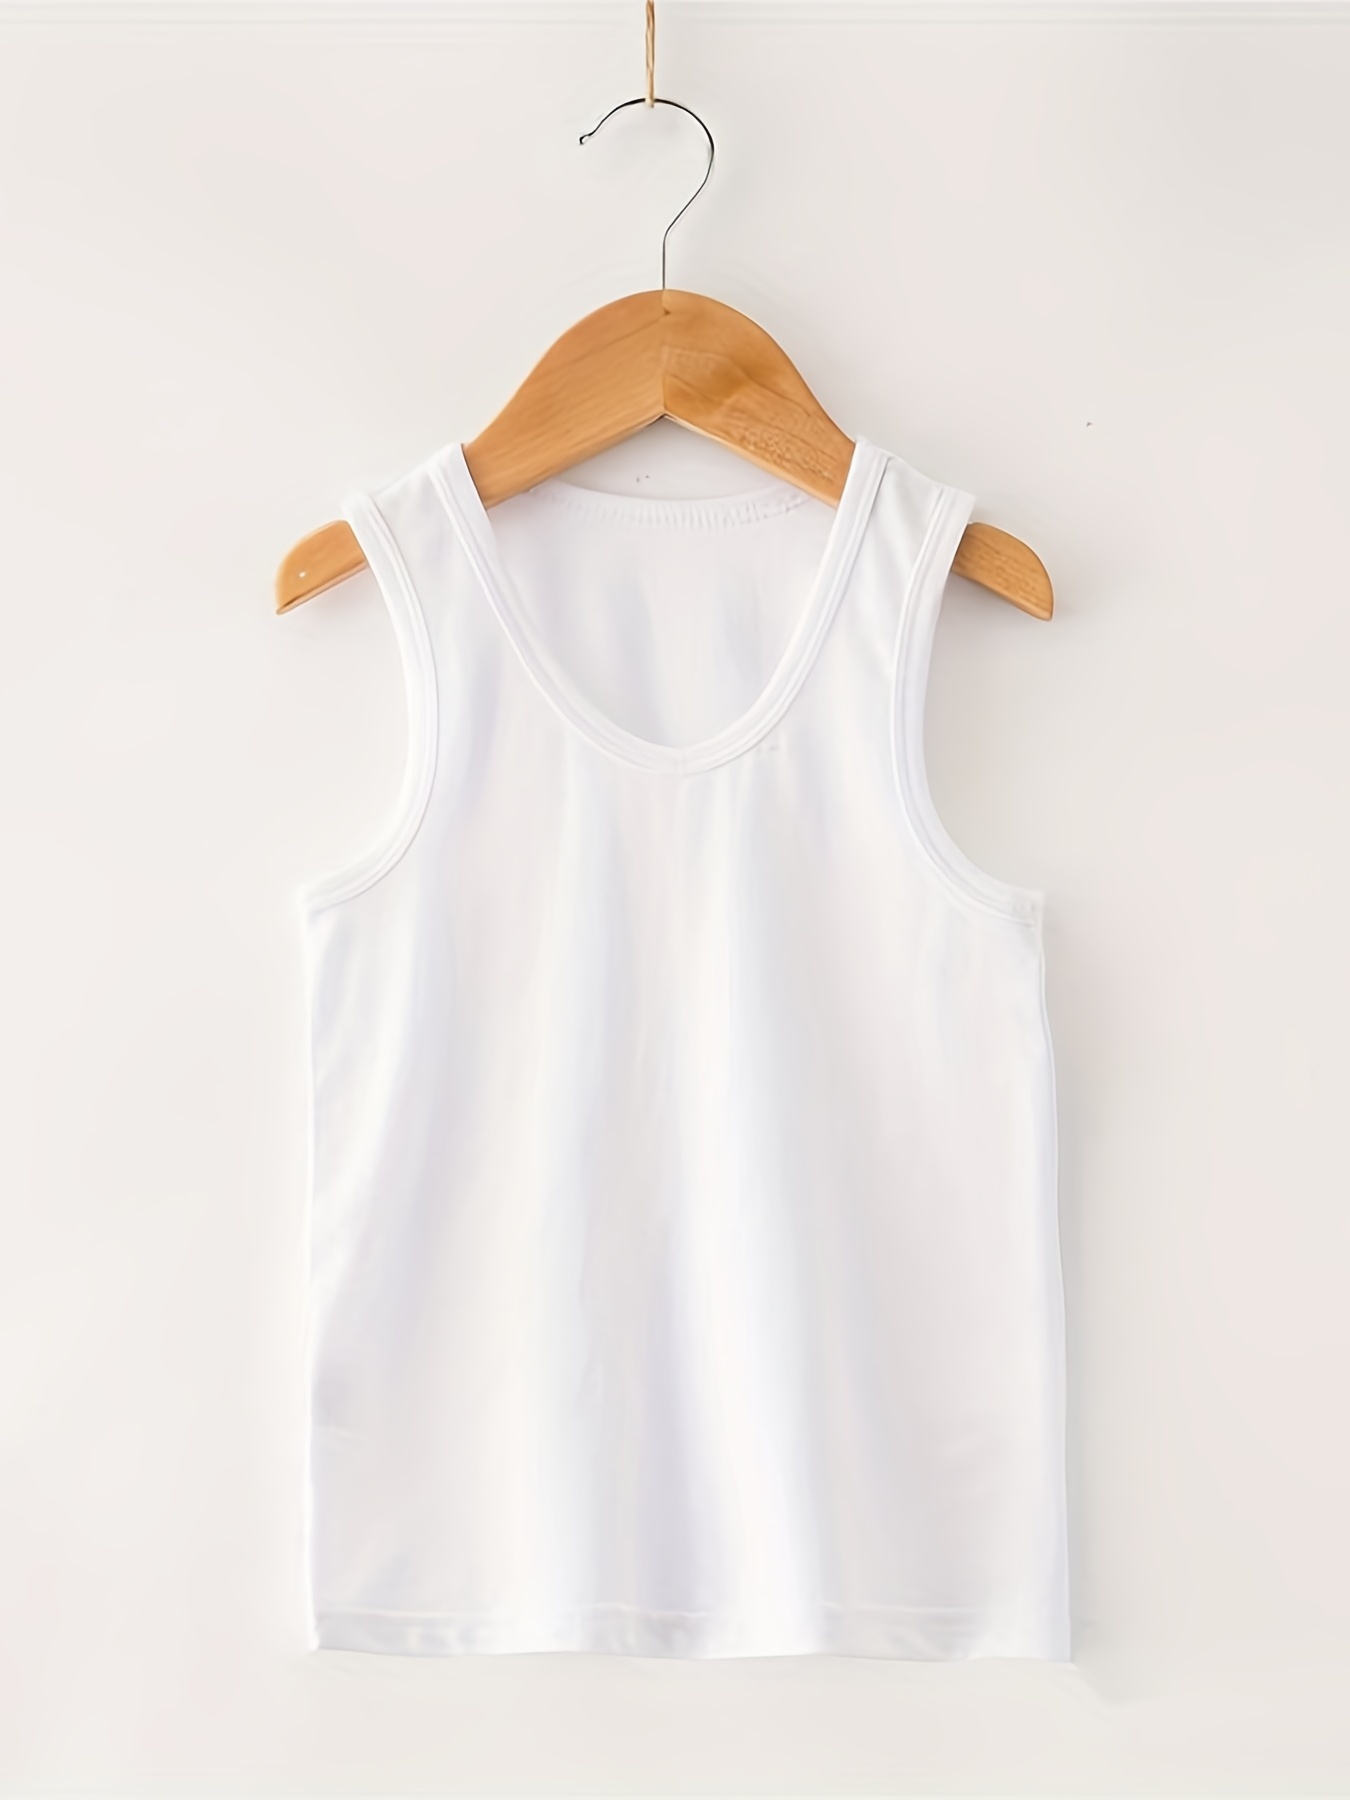 Cotton White Tank top Sando for Girls, Stretchable Fabric